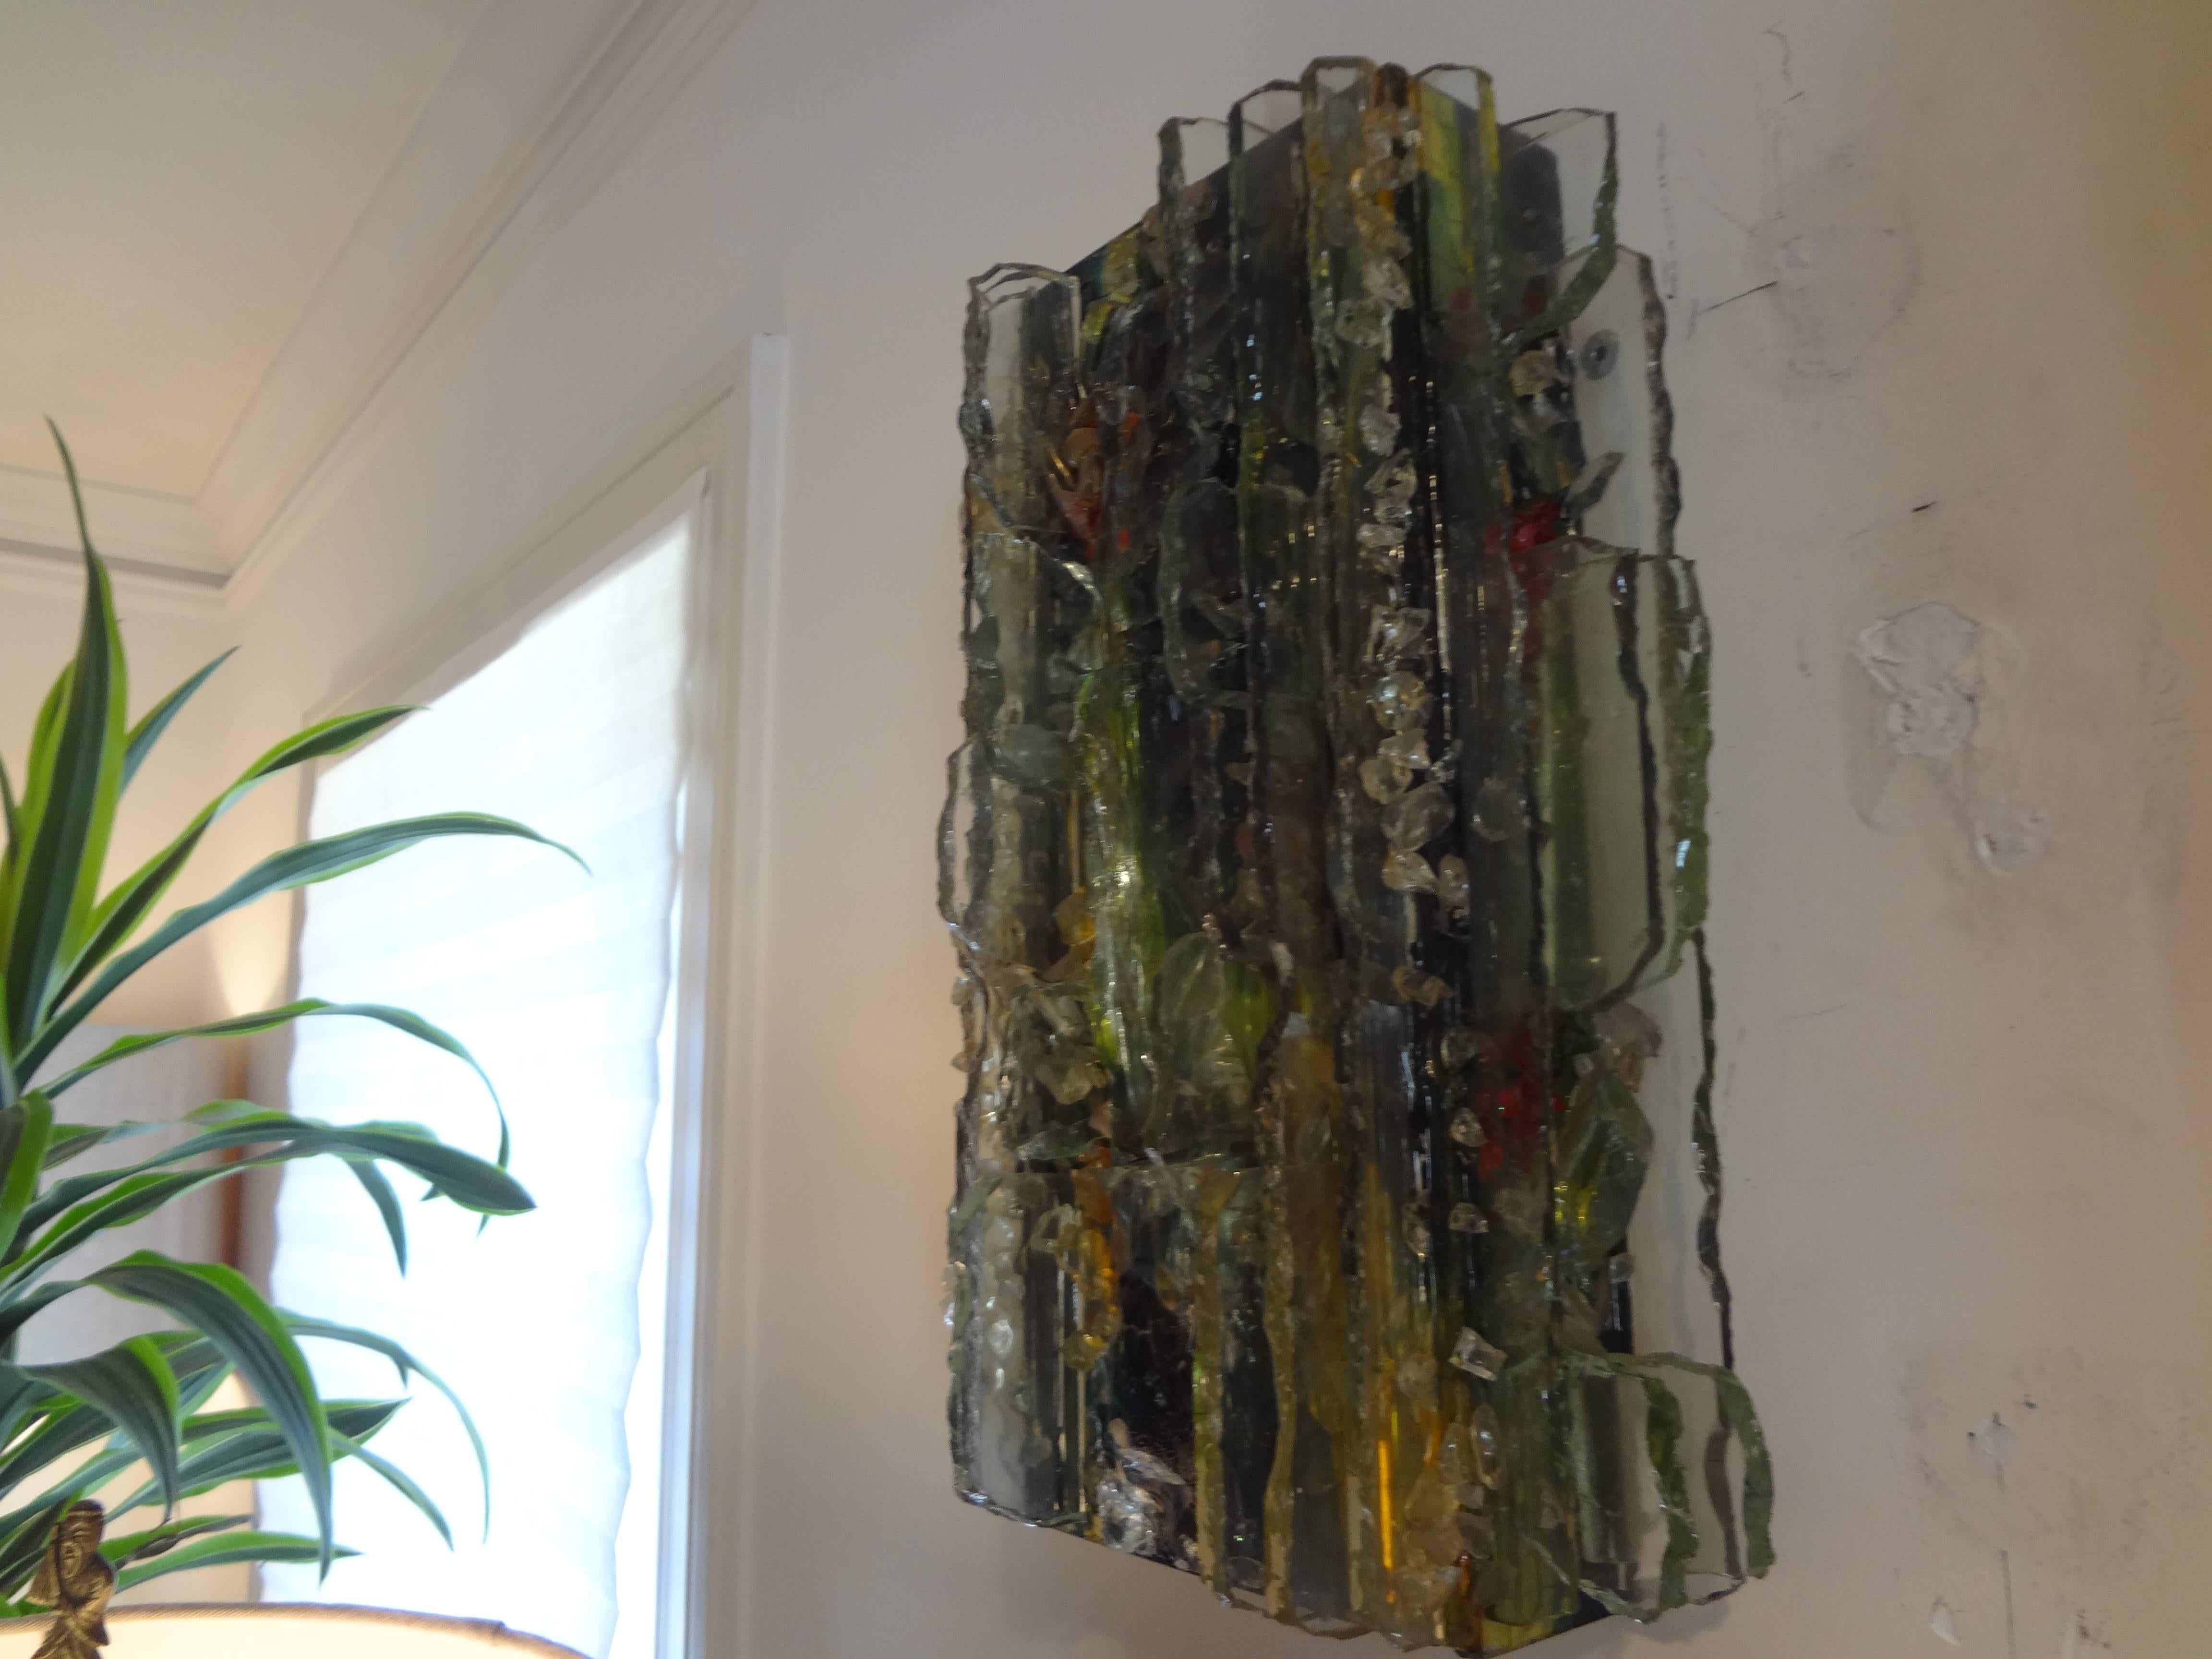 Pair of Multicolored Applied Glass Sconces by A. Lankhorst for RAAK, Amsterdam In Good Condition For Sale In Houston, TX